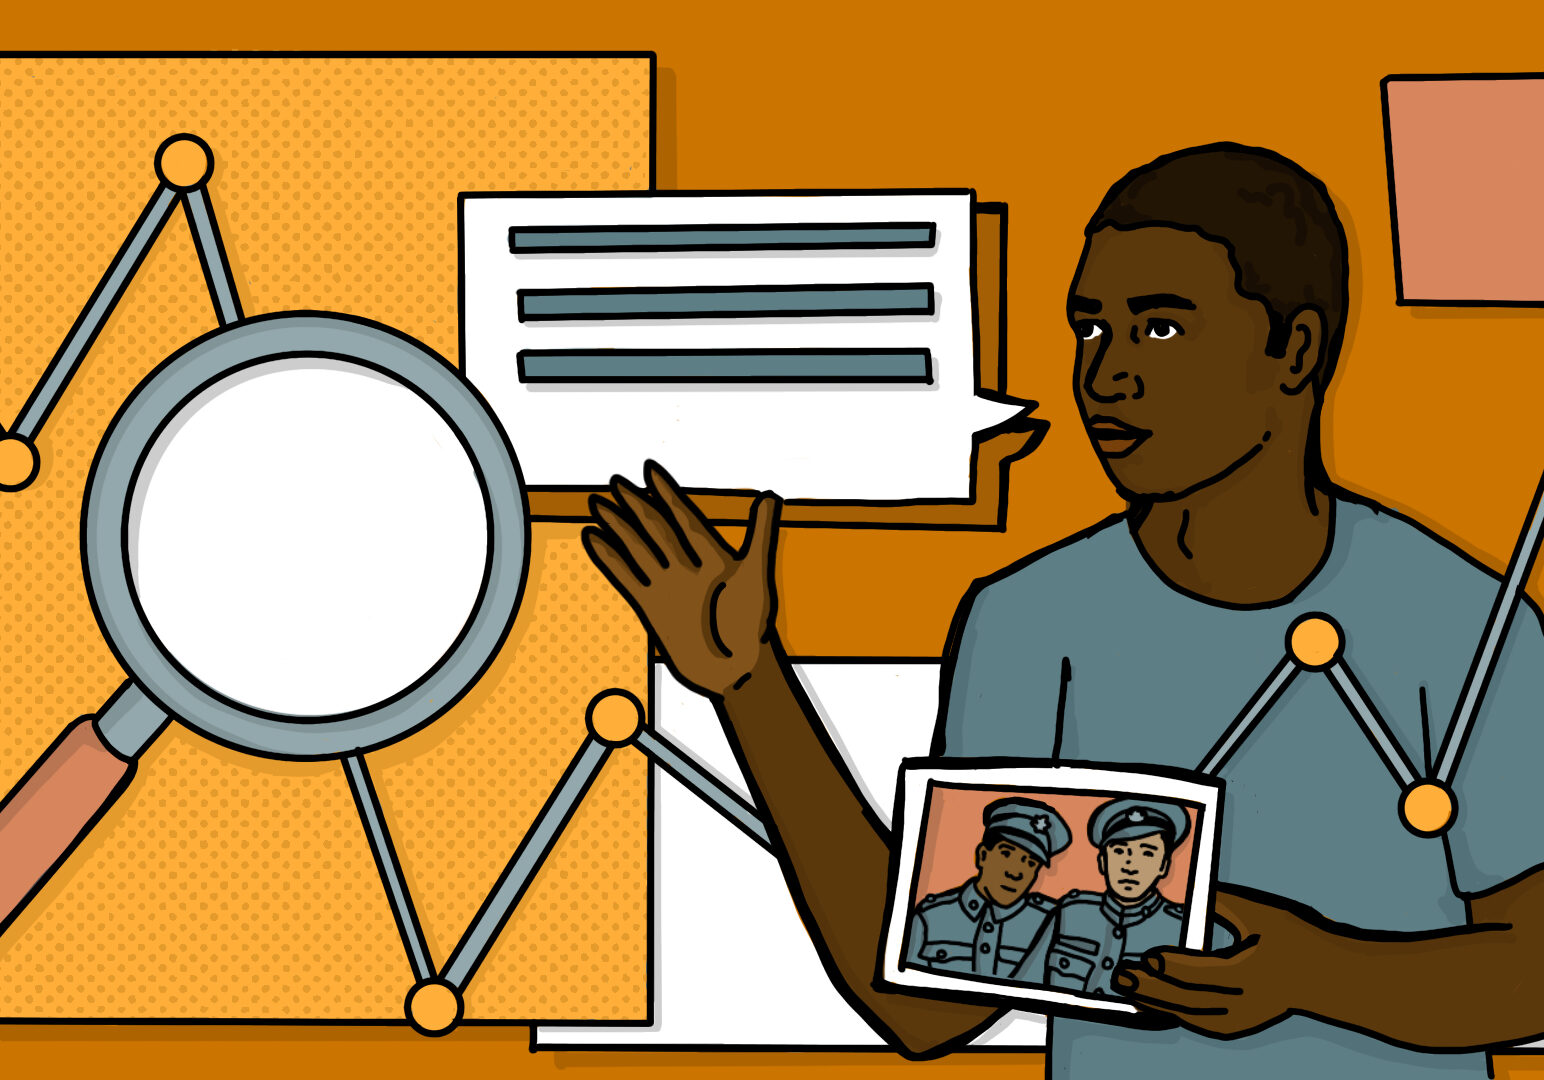 Collage-style illustration shows a young Black man asking questions about a photograph.